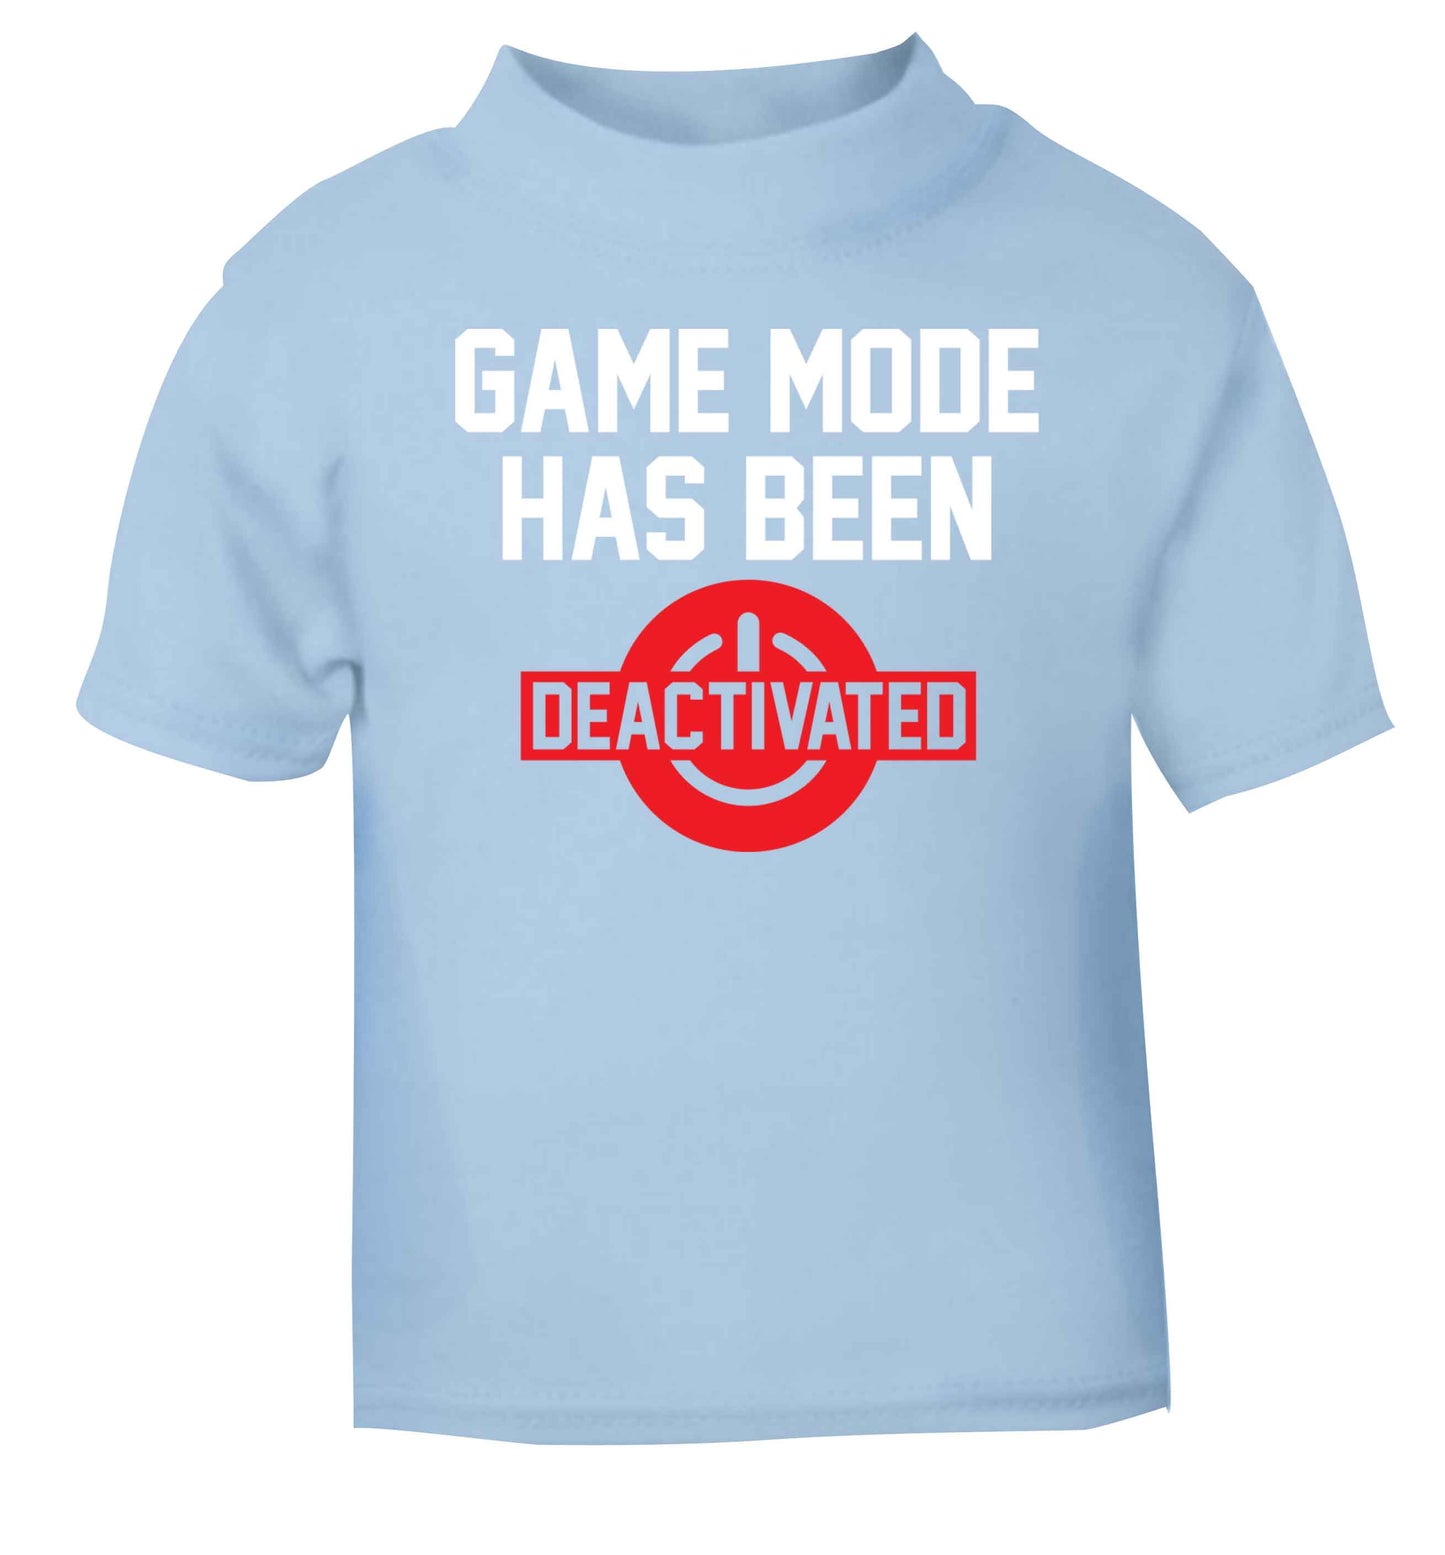 Game Mode Has Been Deactivated light blue baby toddler Tshirt 2 Years